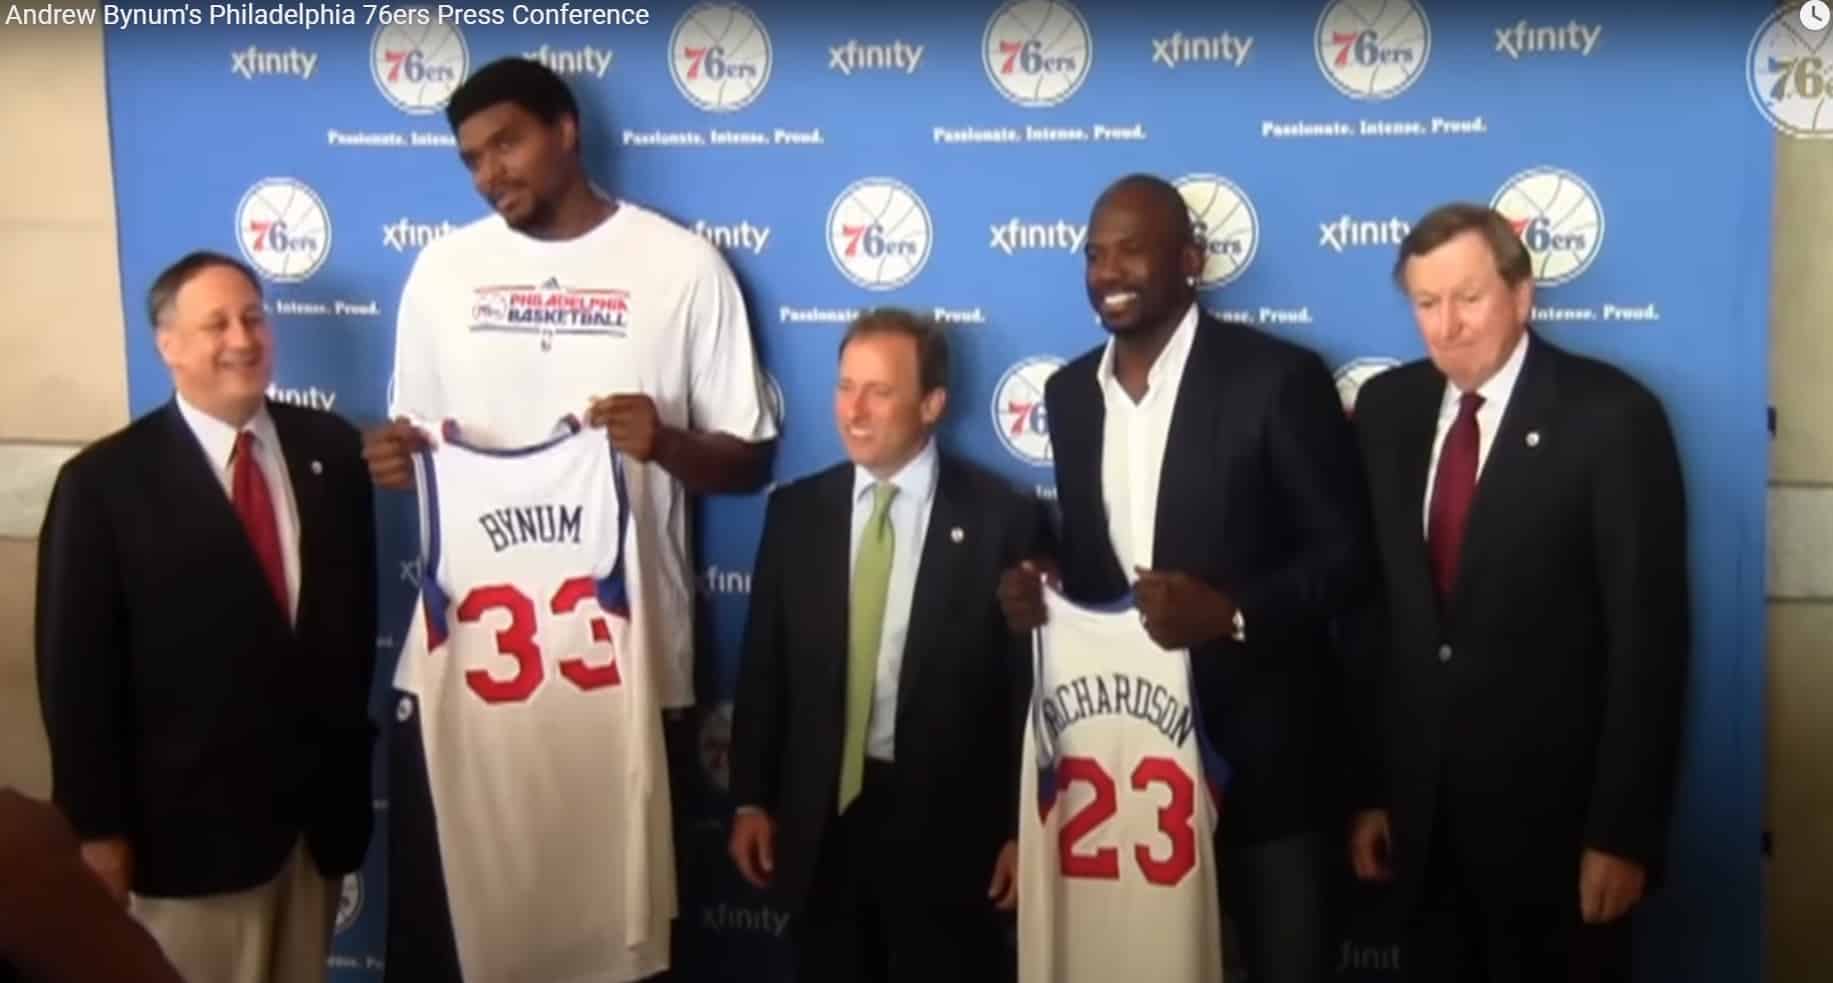 It’s Been Ten Years Since the Andrew Bynum Introductory Press Conference